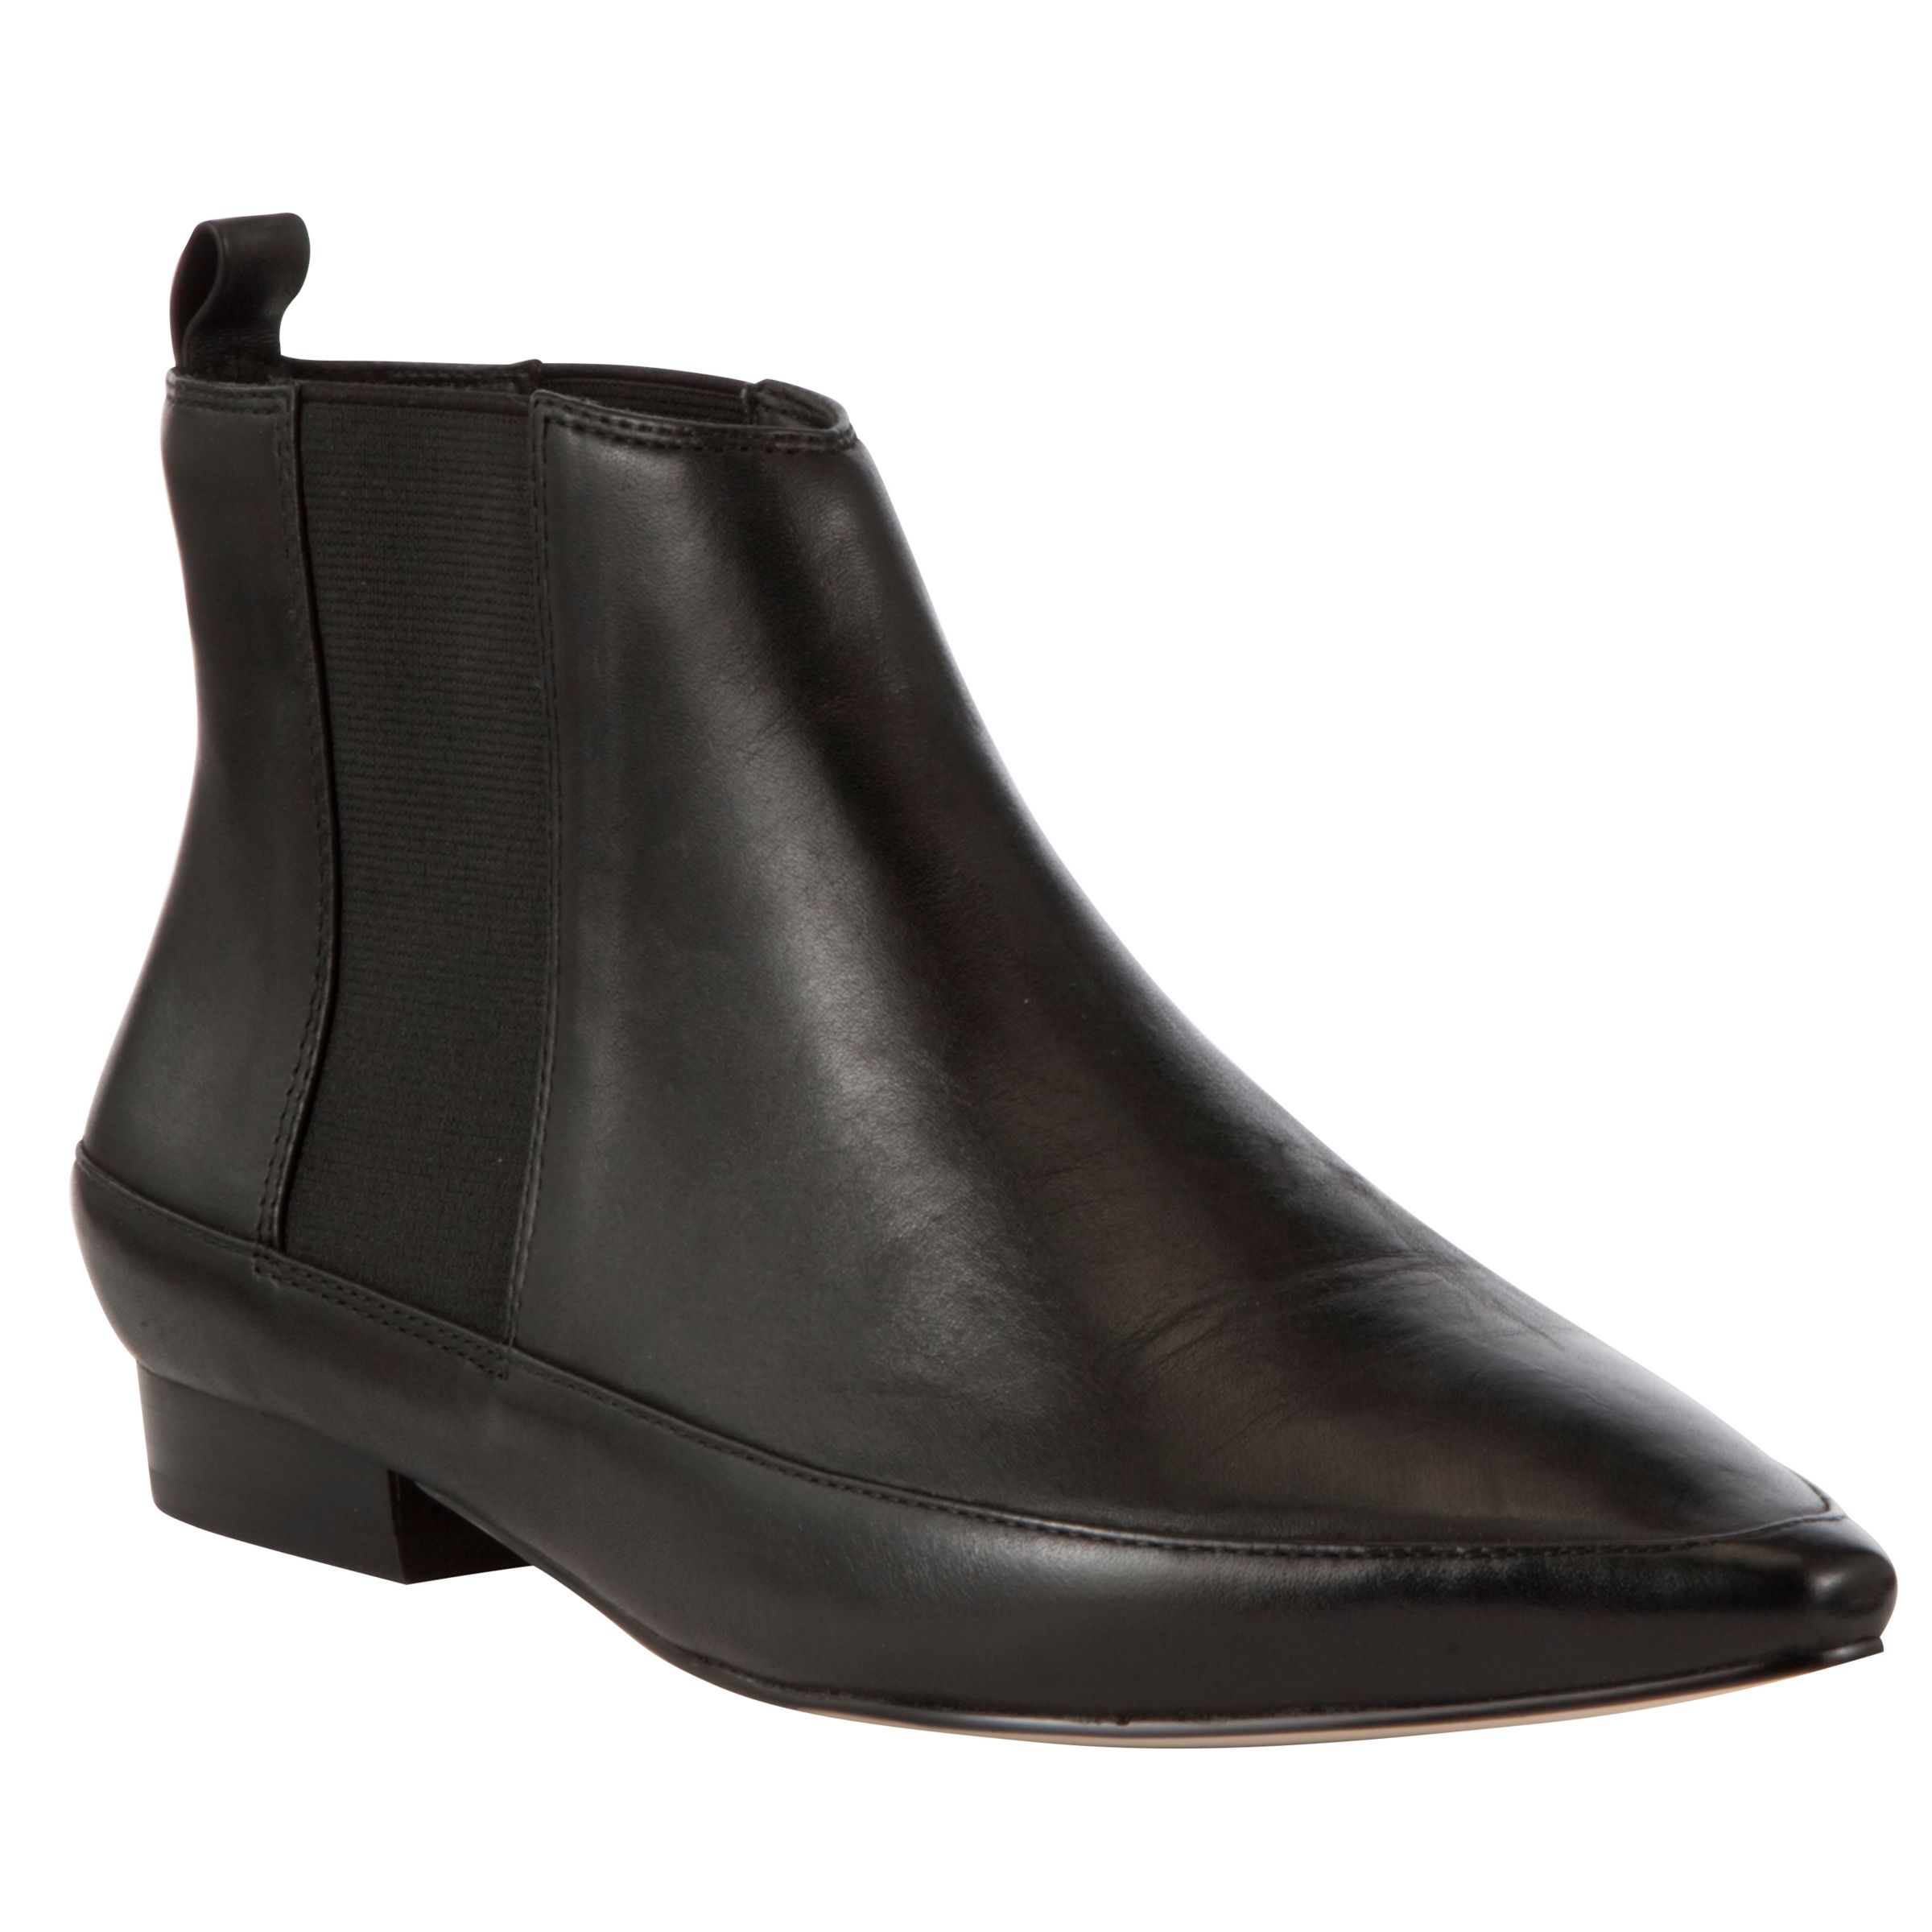 women's flat pointed chelsea boots